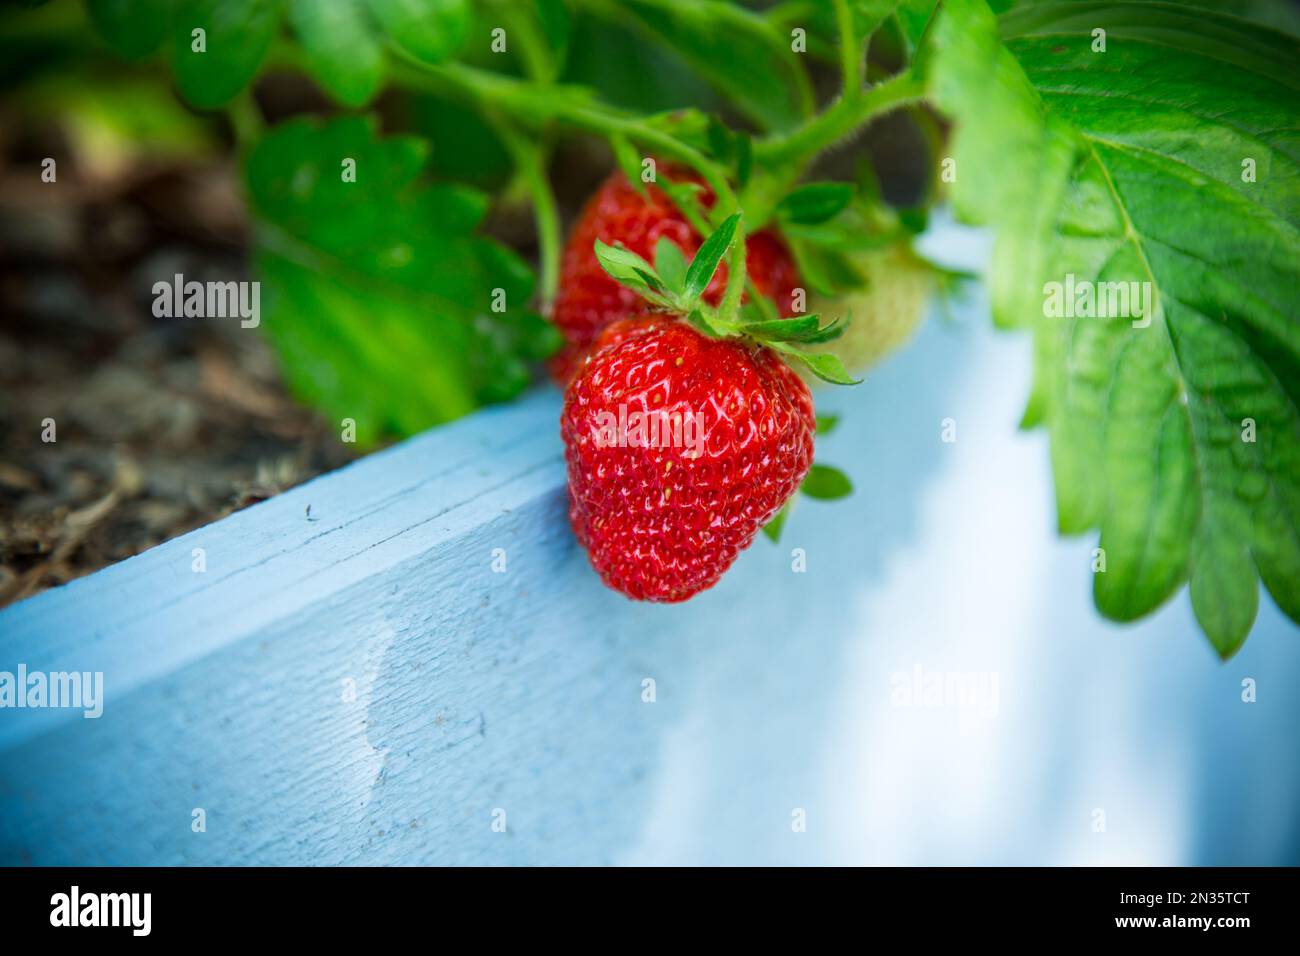 Ripe red strawberries grow on a wooden garden bed outdoors Stock Photo